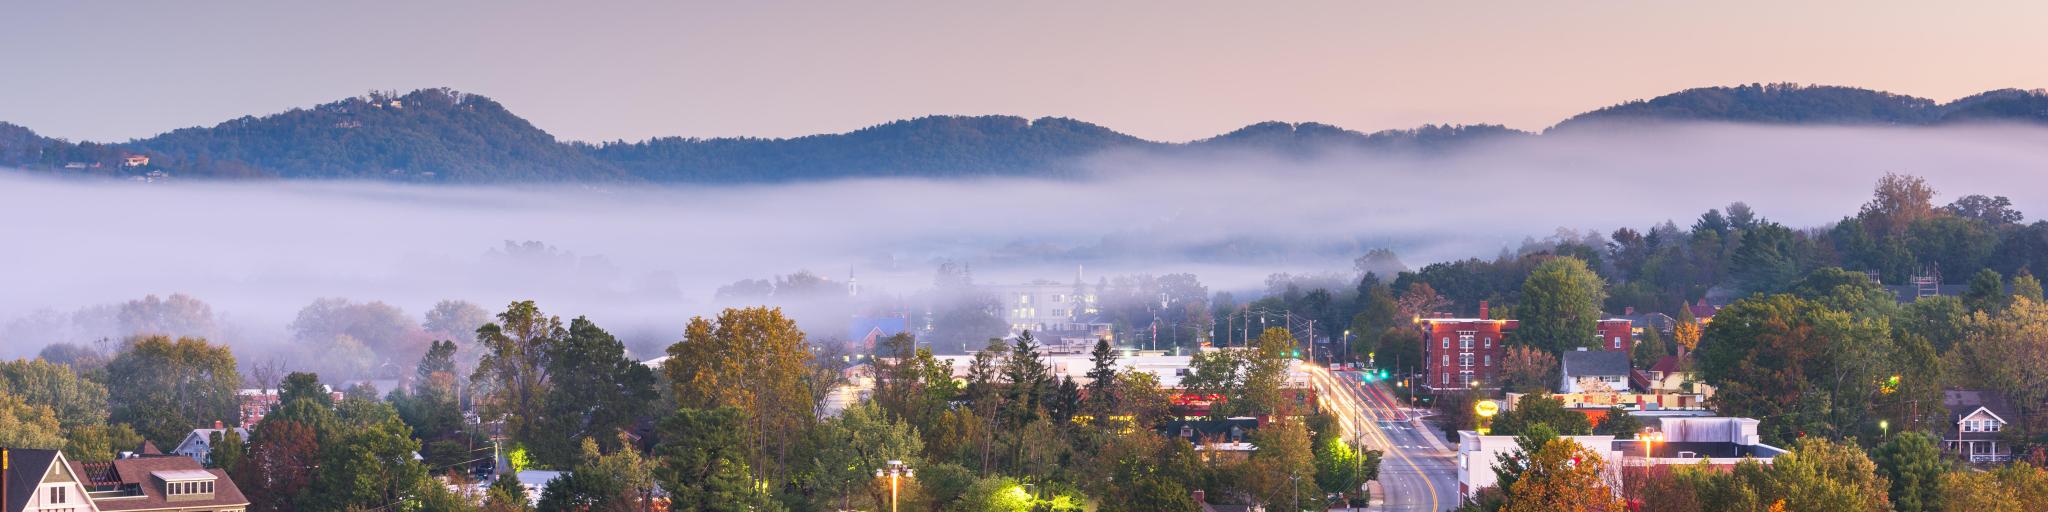 Asheville, North Carolina, downtown skyline at dusk with mountains and fog in the background